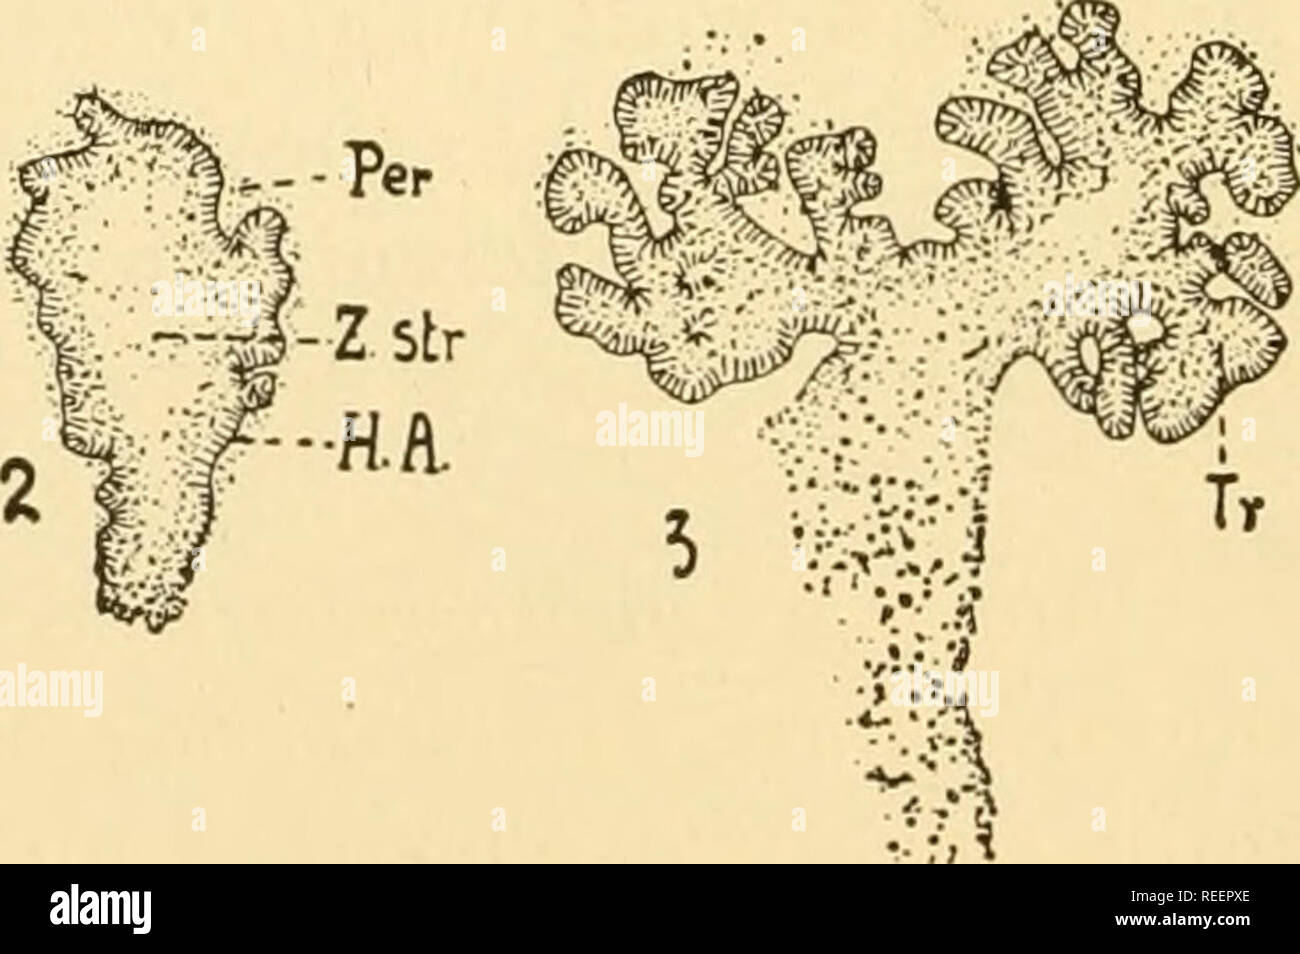 . Comparative morphology of Fungi. Fungi. Fig. 312.—Gautieria graveolens. A. Habit. B. Section of fructification, showing colum- ella and tramal plates. ( X 2; after E. Fischer, 1900.) In Gautieria we have a gradual degeneration of the peridium from such species as G. Rodwayi and G. Parksiana with thick peridia, through undescribed species with thin evanescent peridia, to species where the peri- dium is absent at maturity, although still present in young individuals. Only this last group has been studied ontogenetically (Fitzpatrick, 1913). The fructifications are spherical, furrowed and 0.5 t Stock Photo